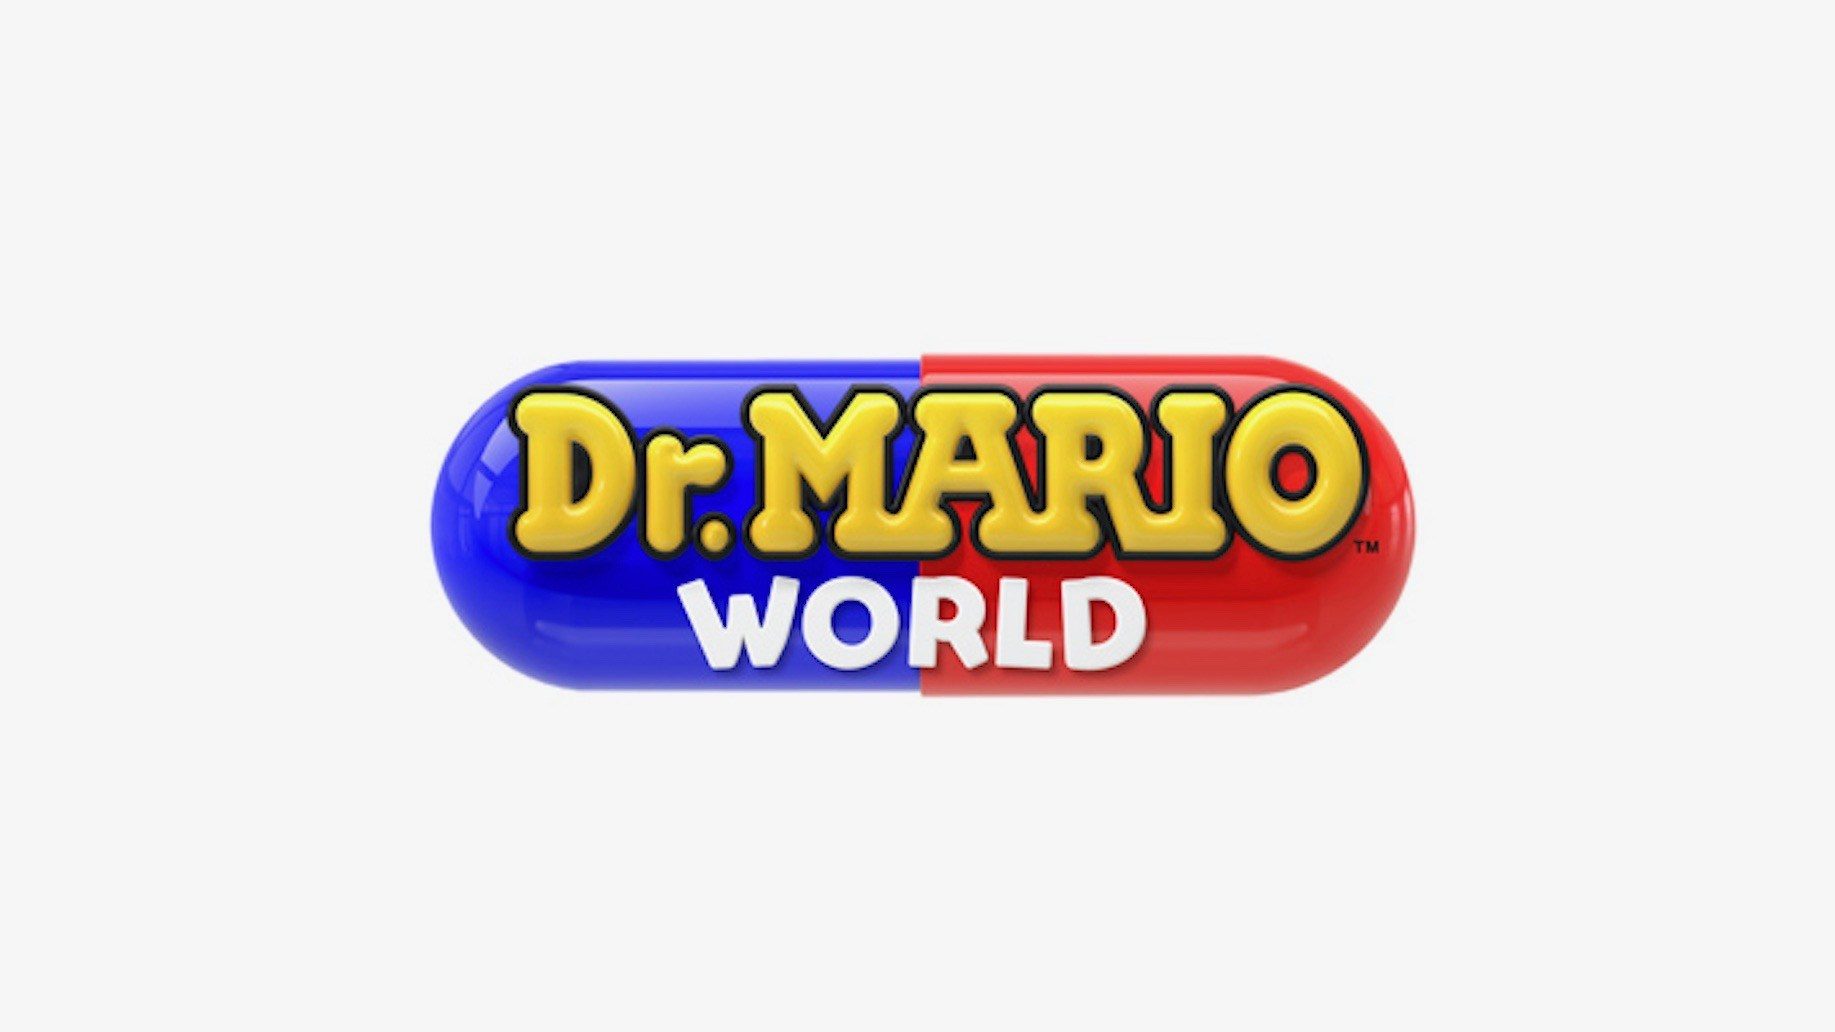 Nintendo officially discontinues Dr. Mario World game for iOS devices